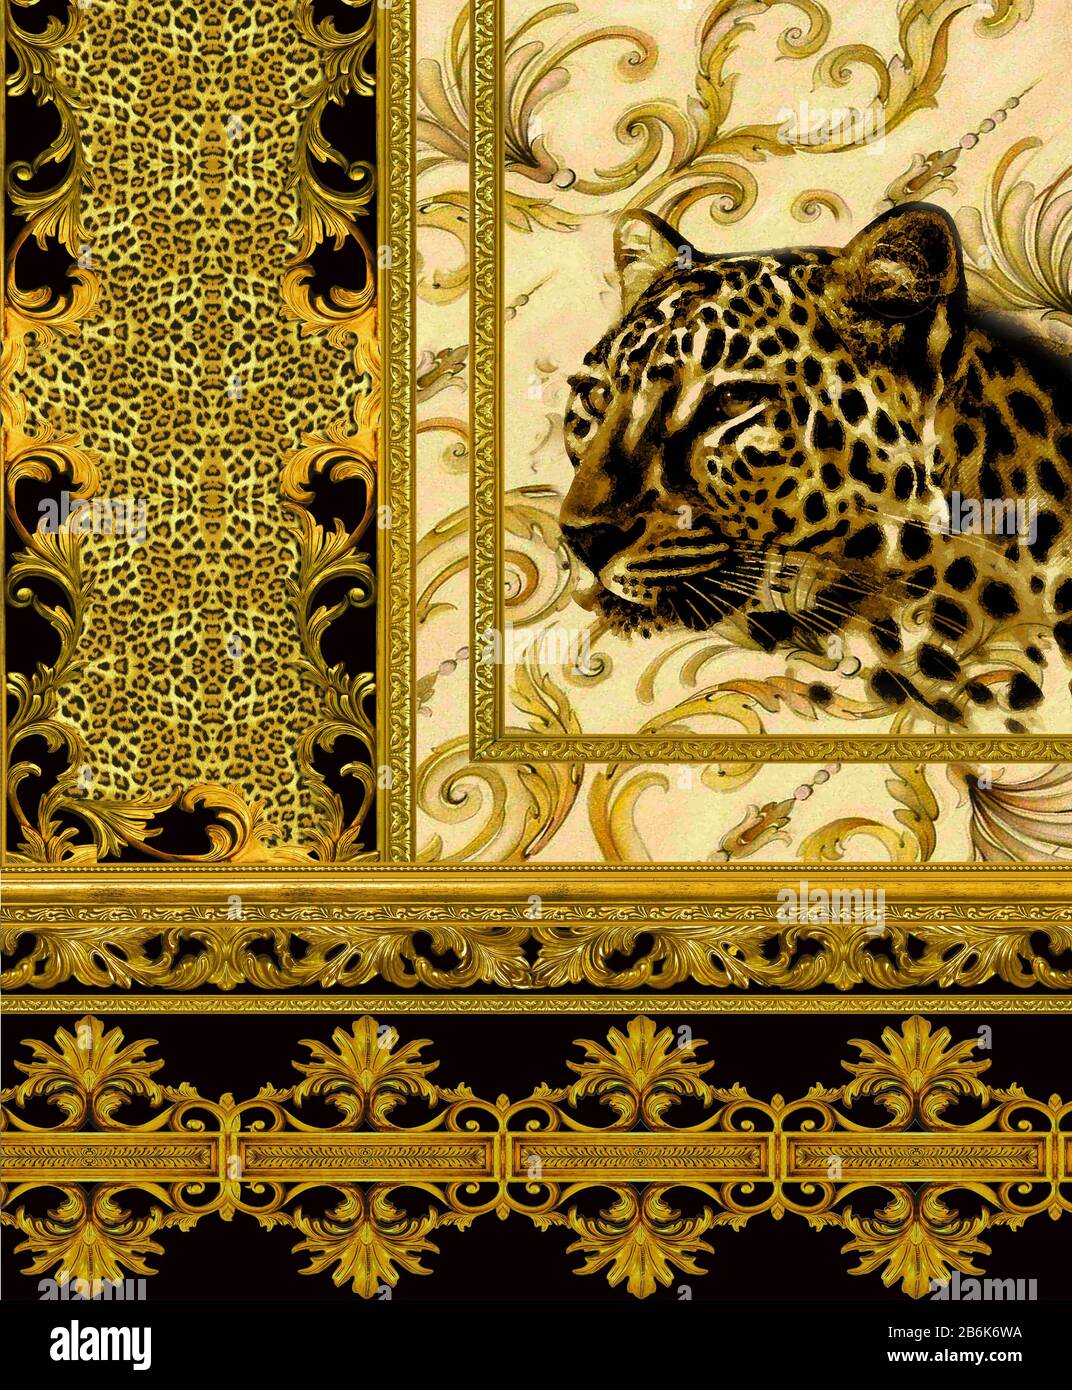 Leopard skin texture and cheetah head with golden borders, floral paisley pattern. Luxury baroque background. - illustration. Stock Photo